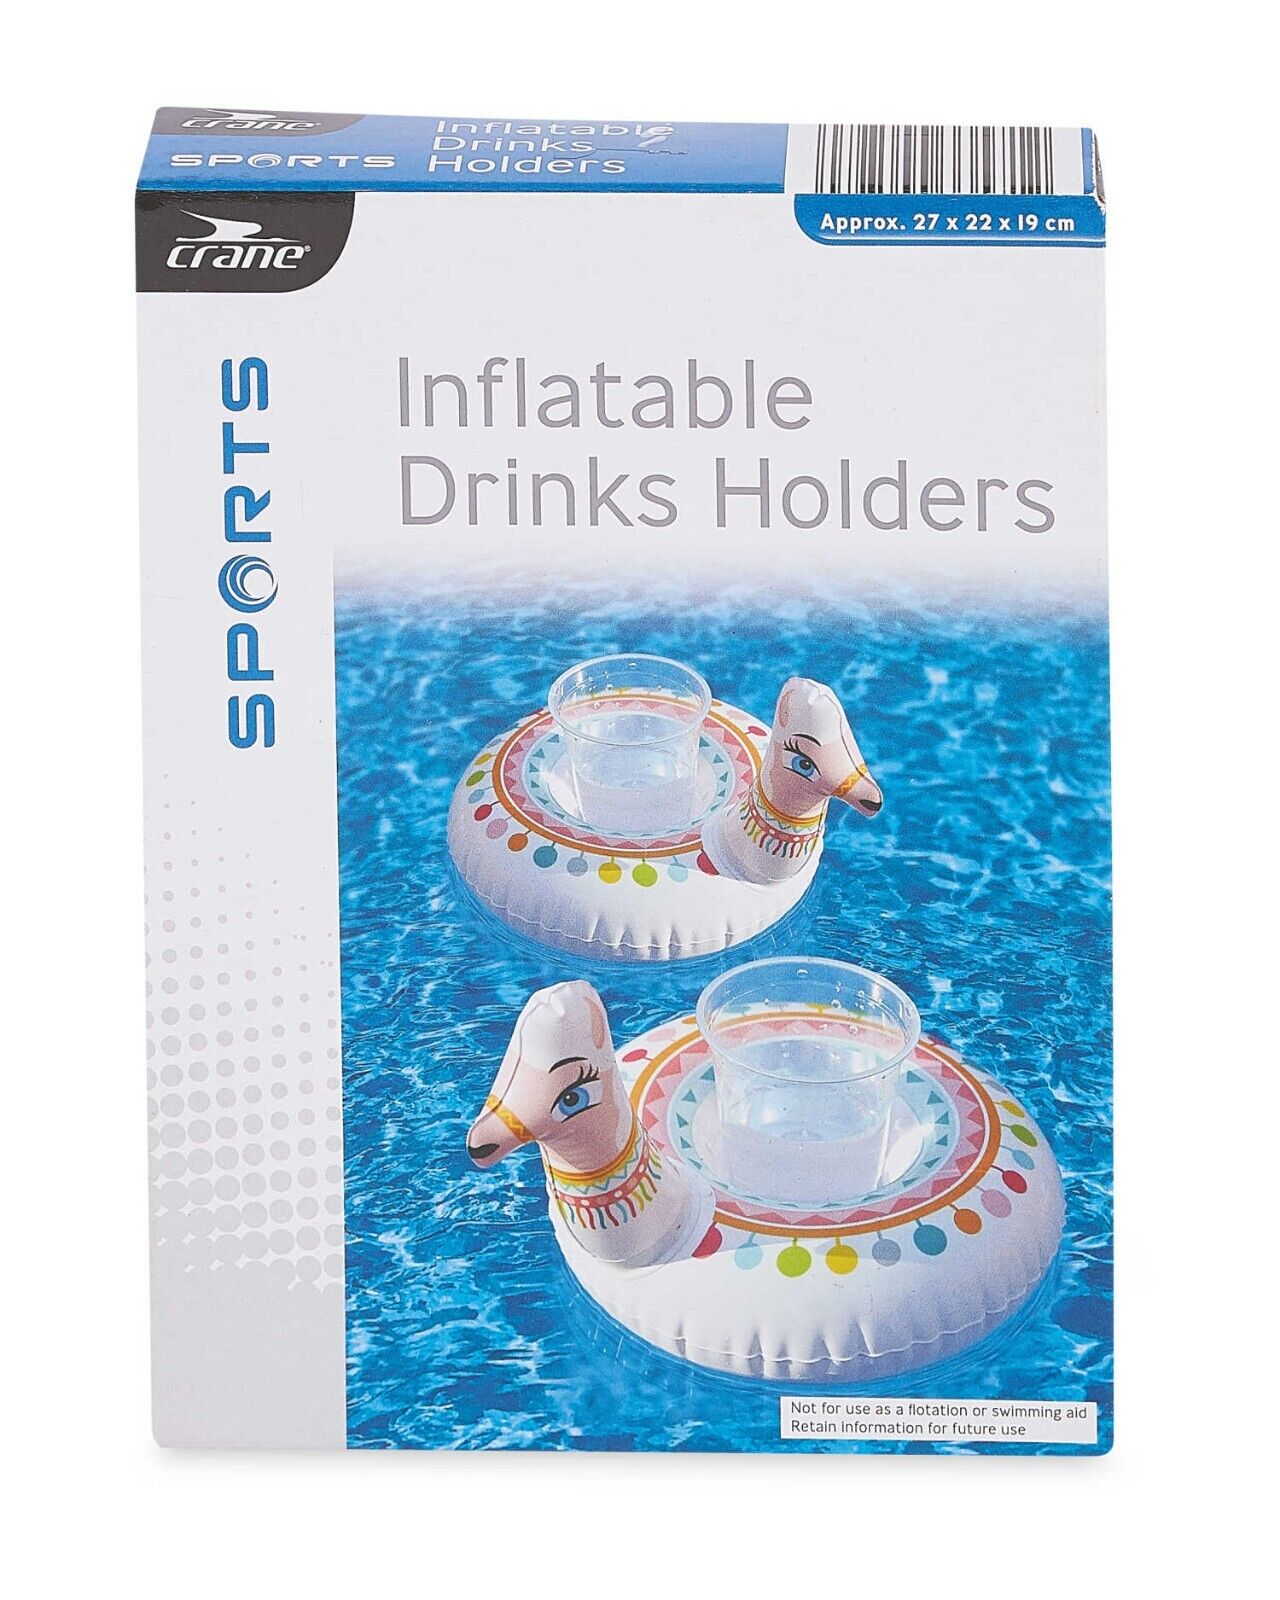 Crane Llama Drinks Holder 2 Pack - Keep your drinks cool in the pool with these fun and colorful inflatable holders. Perfect for your pool or summer party. Dimensions: 27 x 22 x 19cm. Made of PVC vinyl. Pack Size: 2.